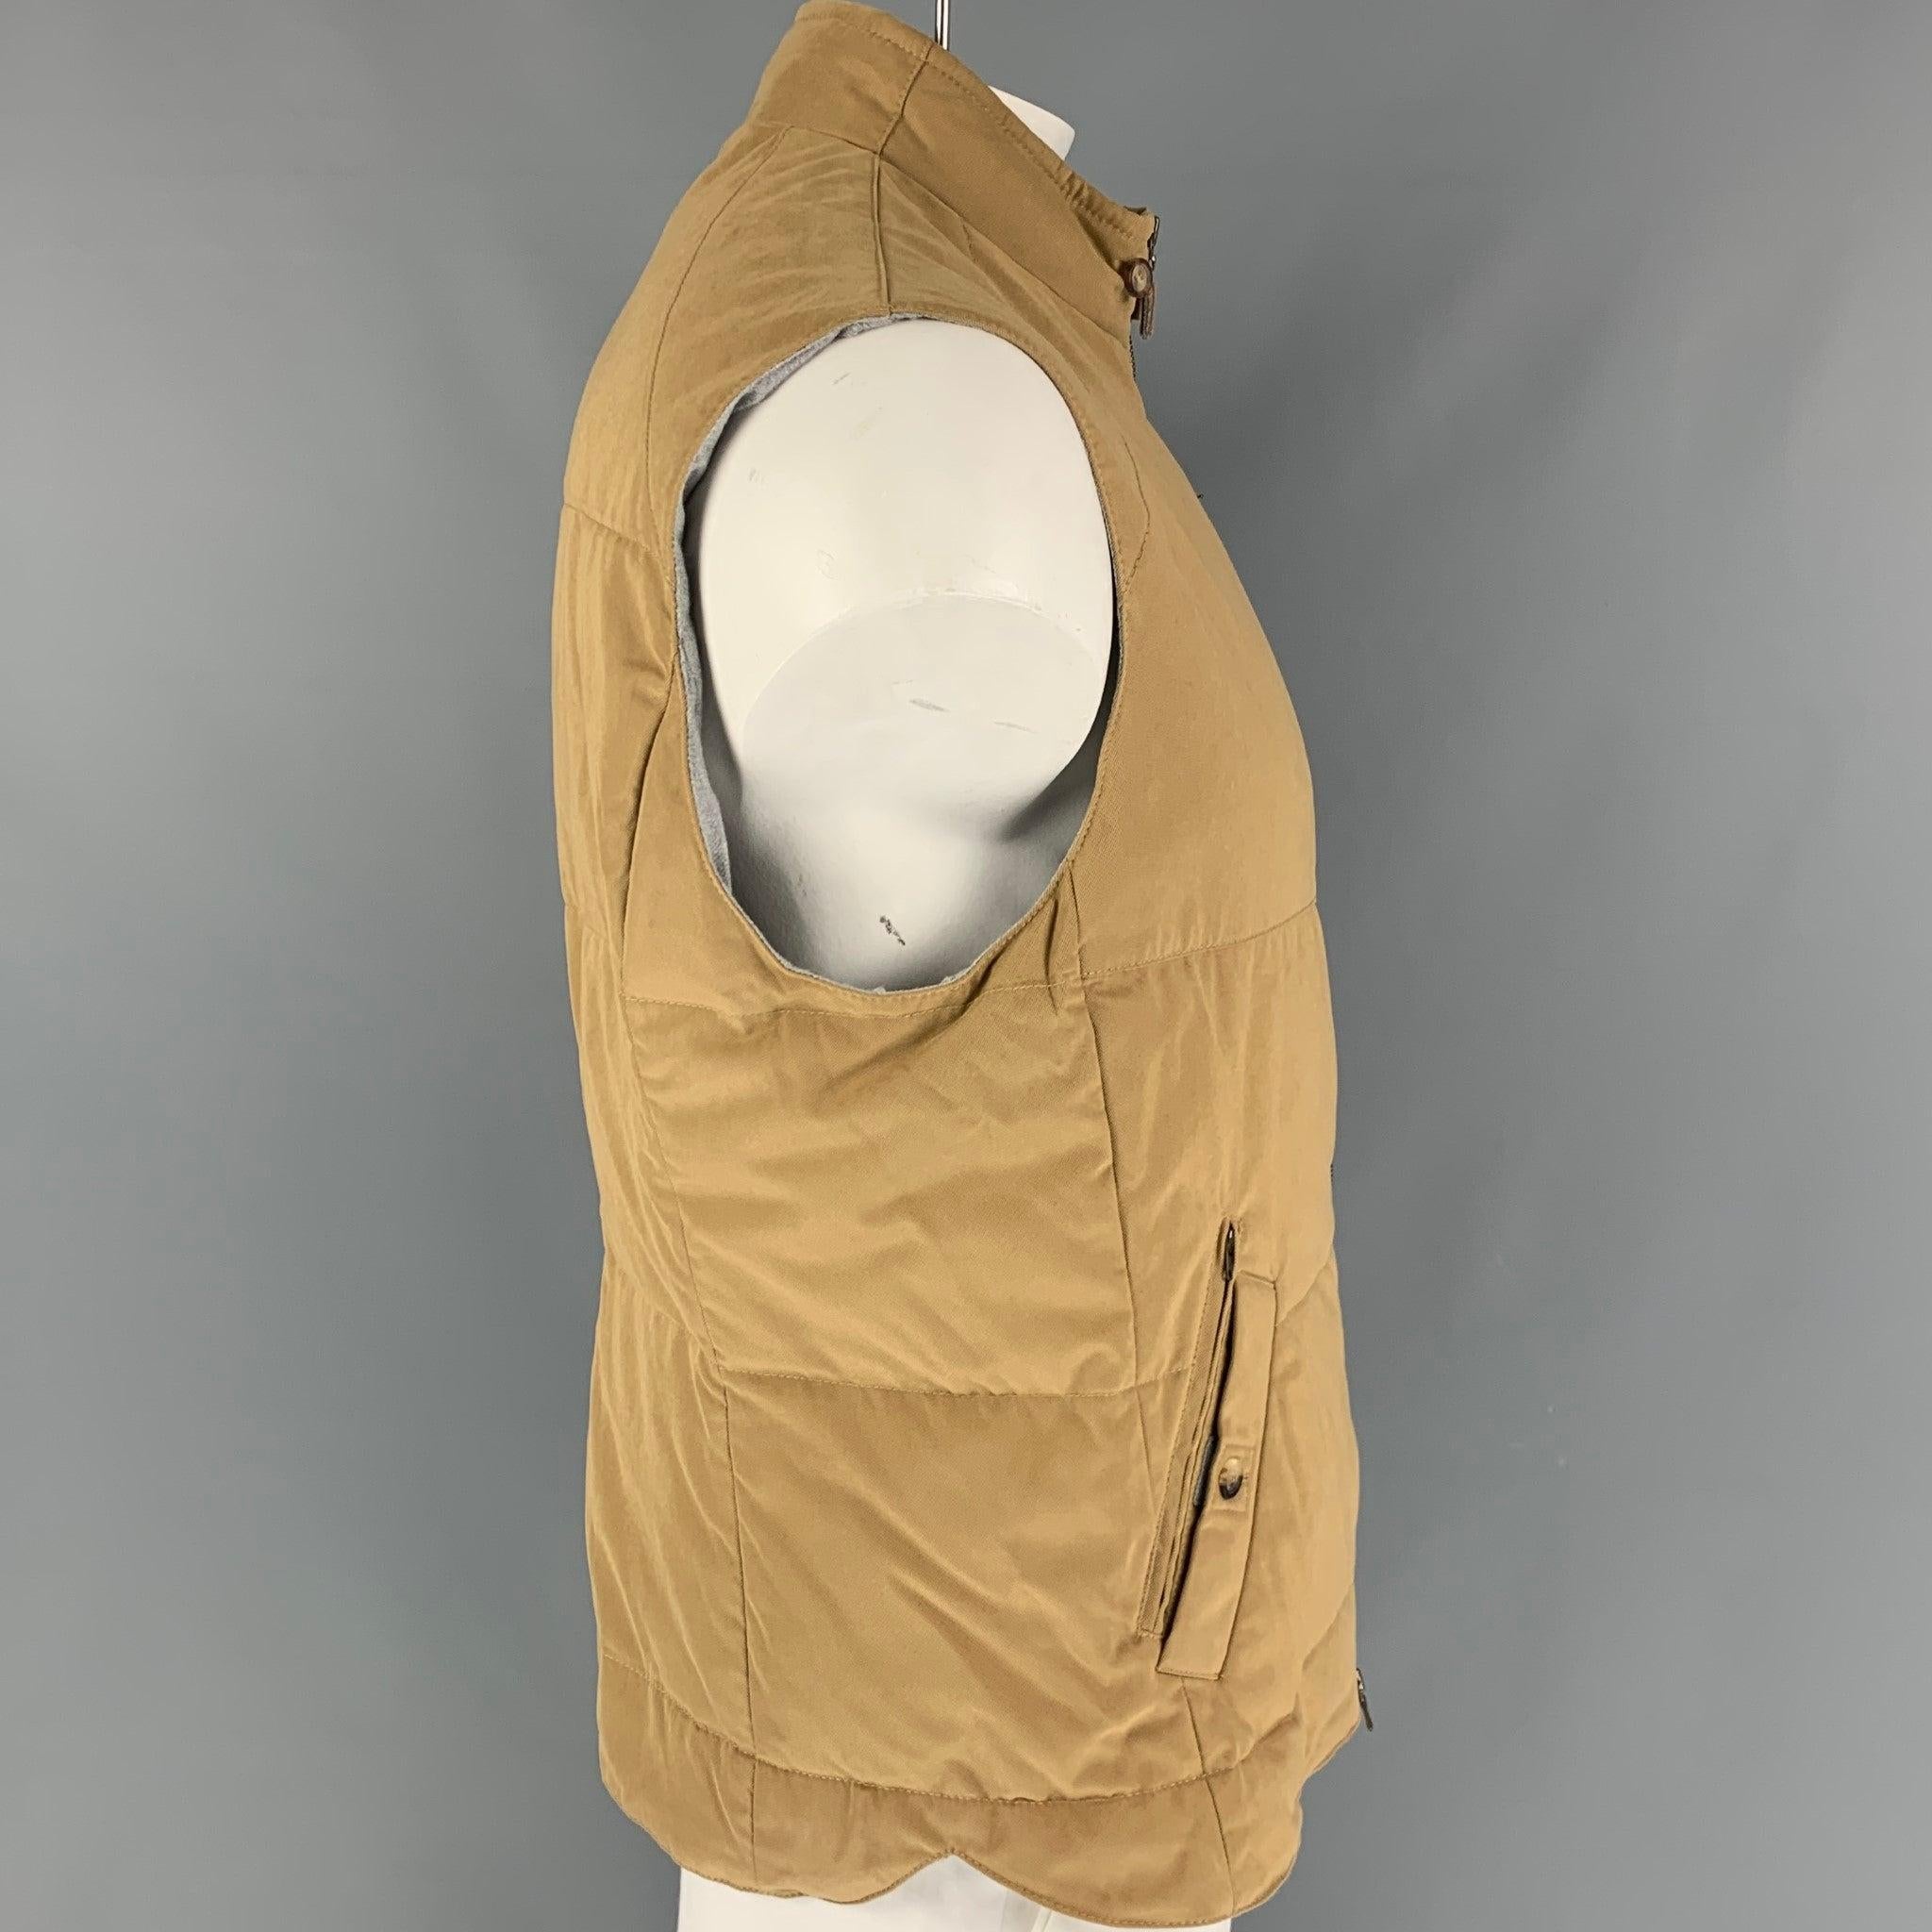 BRUNELLO CUCINELLI vest comes in a khaki quilted wool / cashmere featuring a buttoned collar, front pockets, and a zip up closure. Made in Italy. New With Tags.
 

Marked:   XL 

Measurements: 
 
Shoulder: 19 inches  Chest: 48 inches  Length: 28